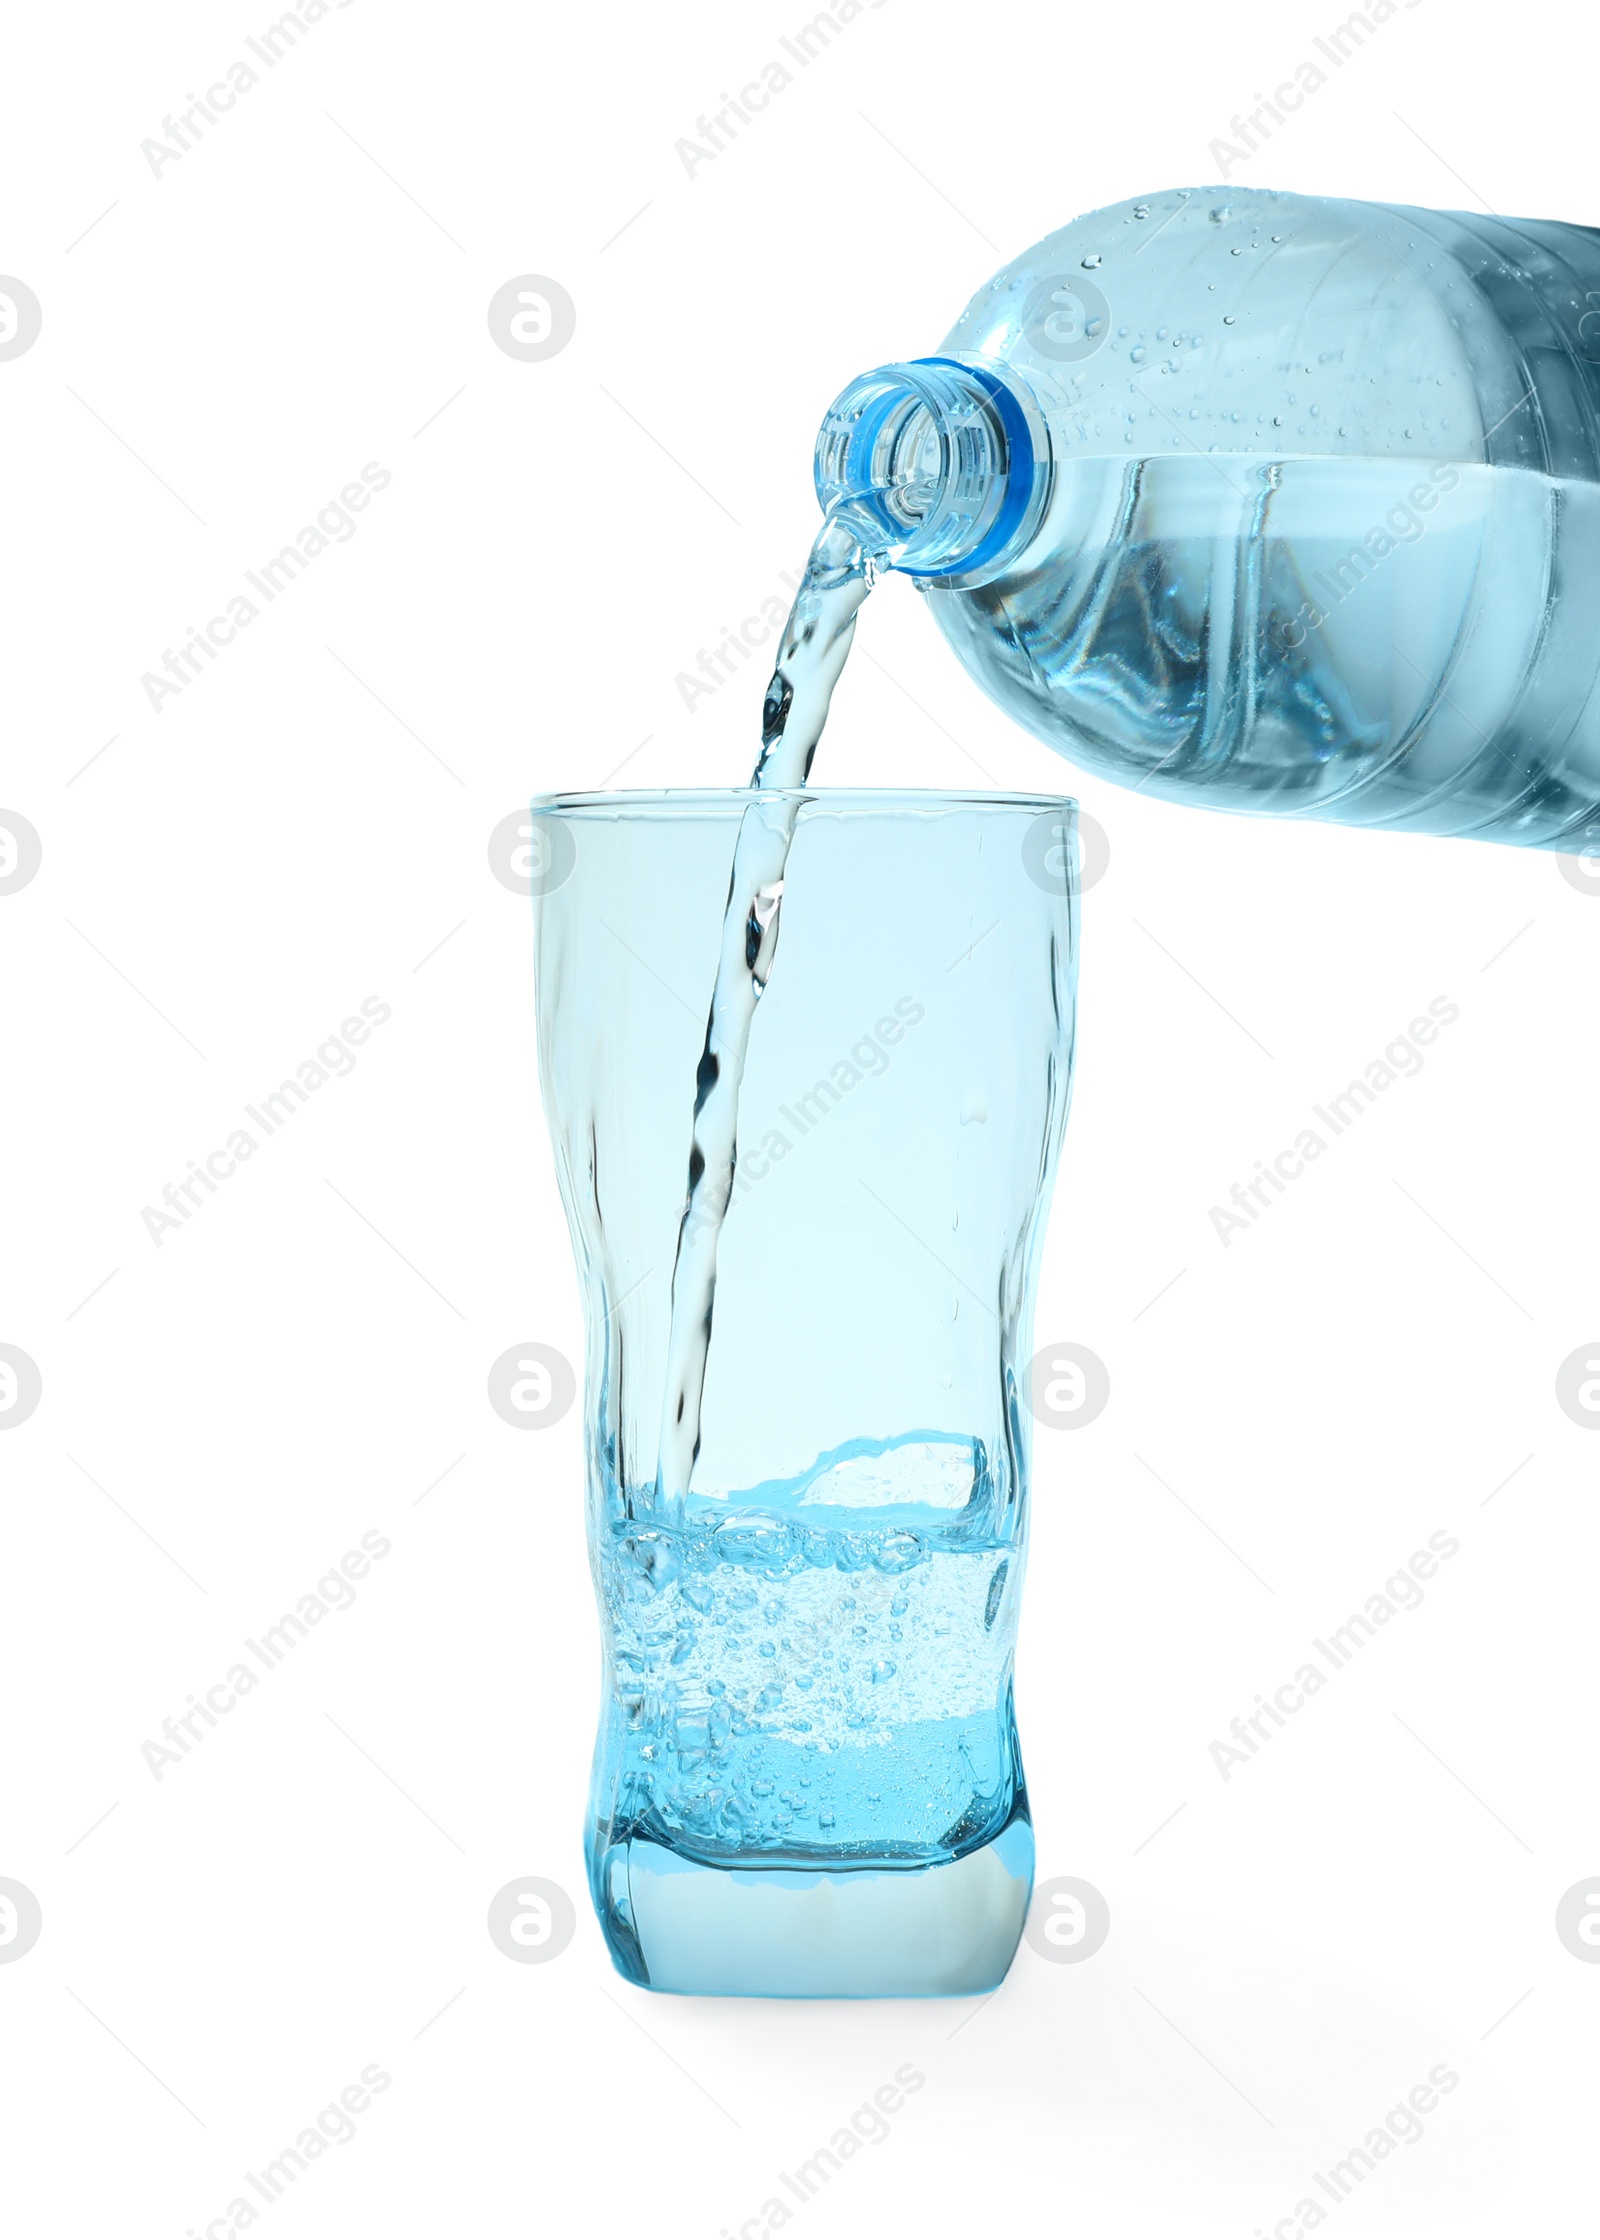 Photo of Pouring water from bottle into glass against blue background. Refreshing drink